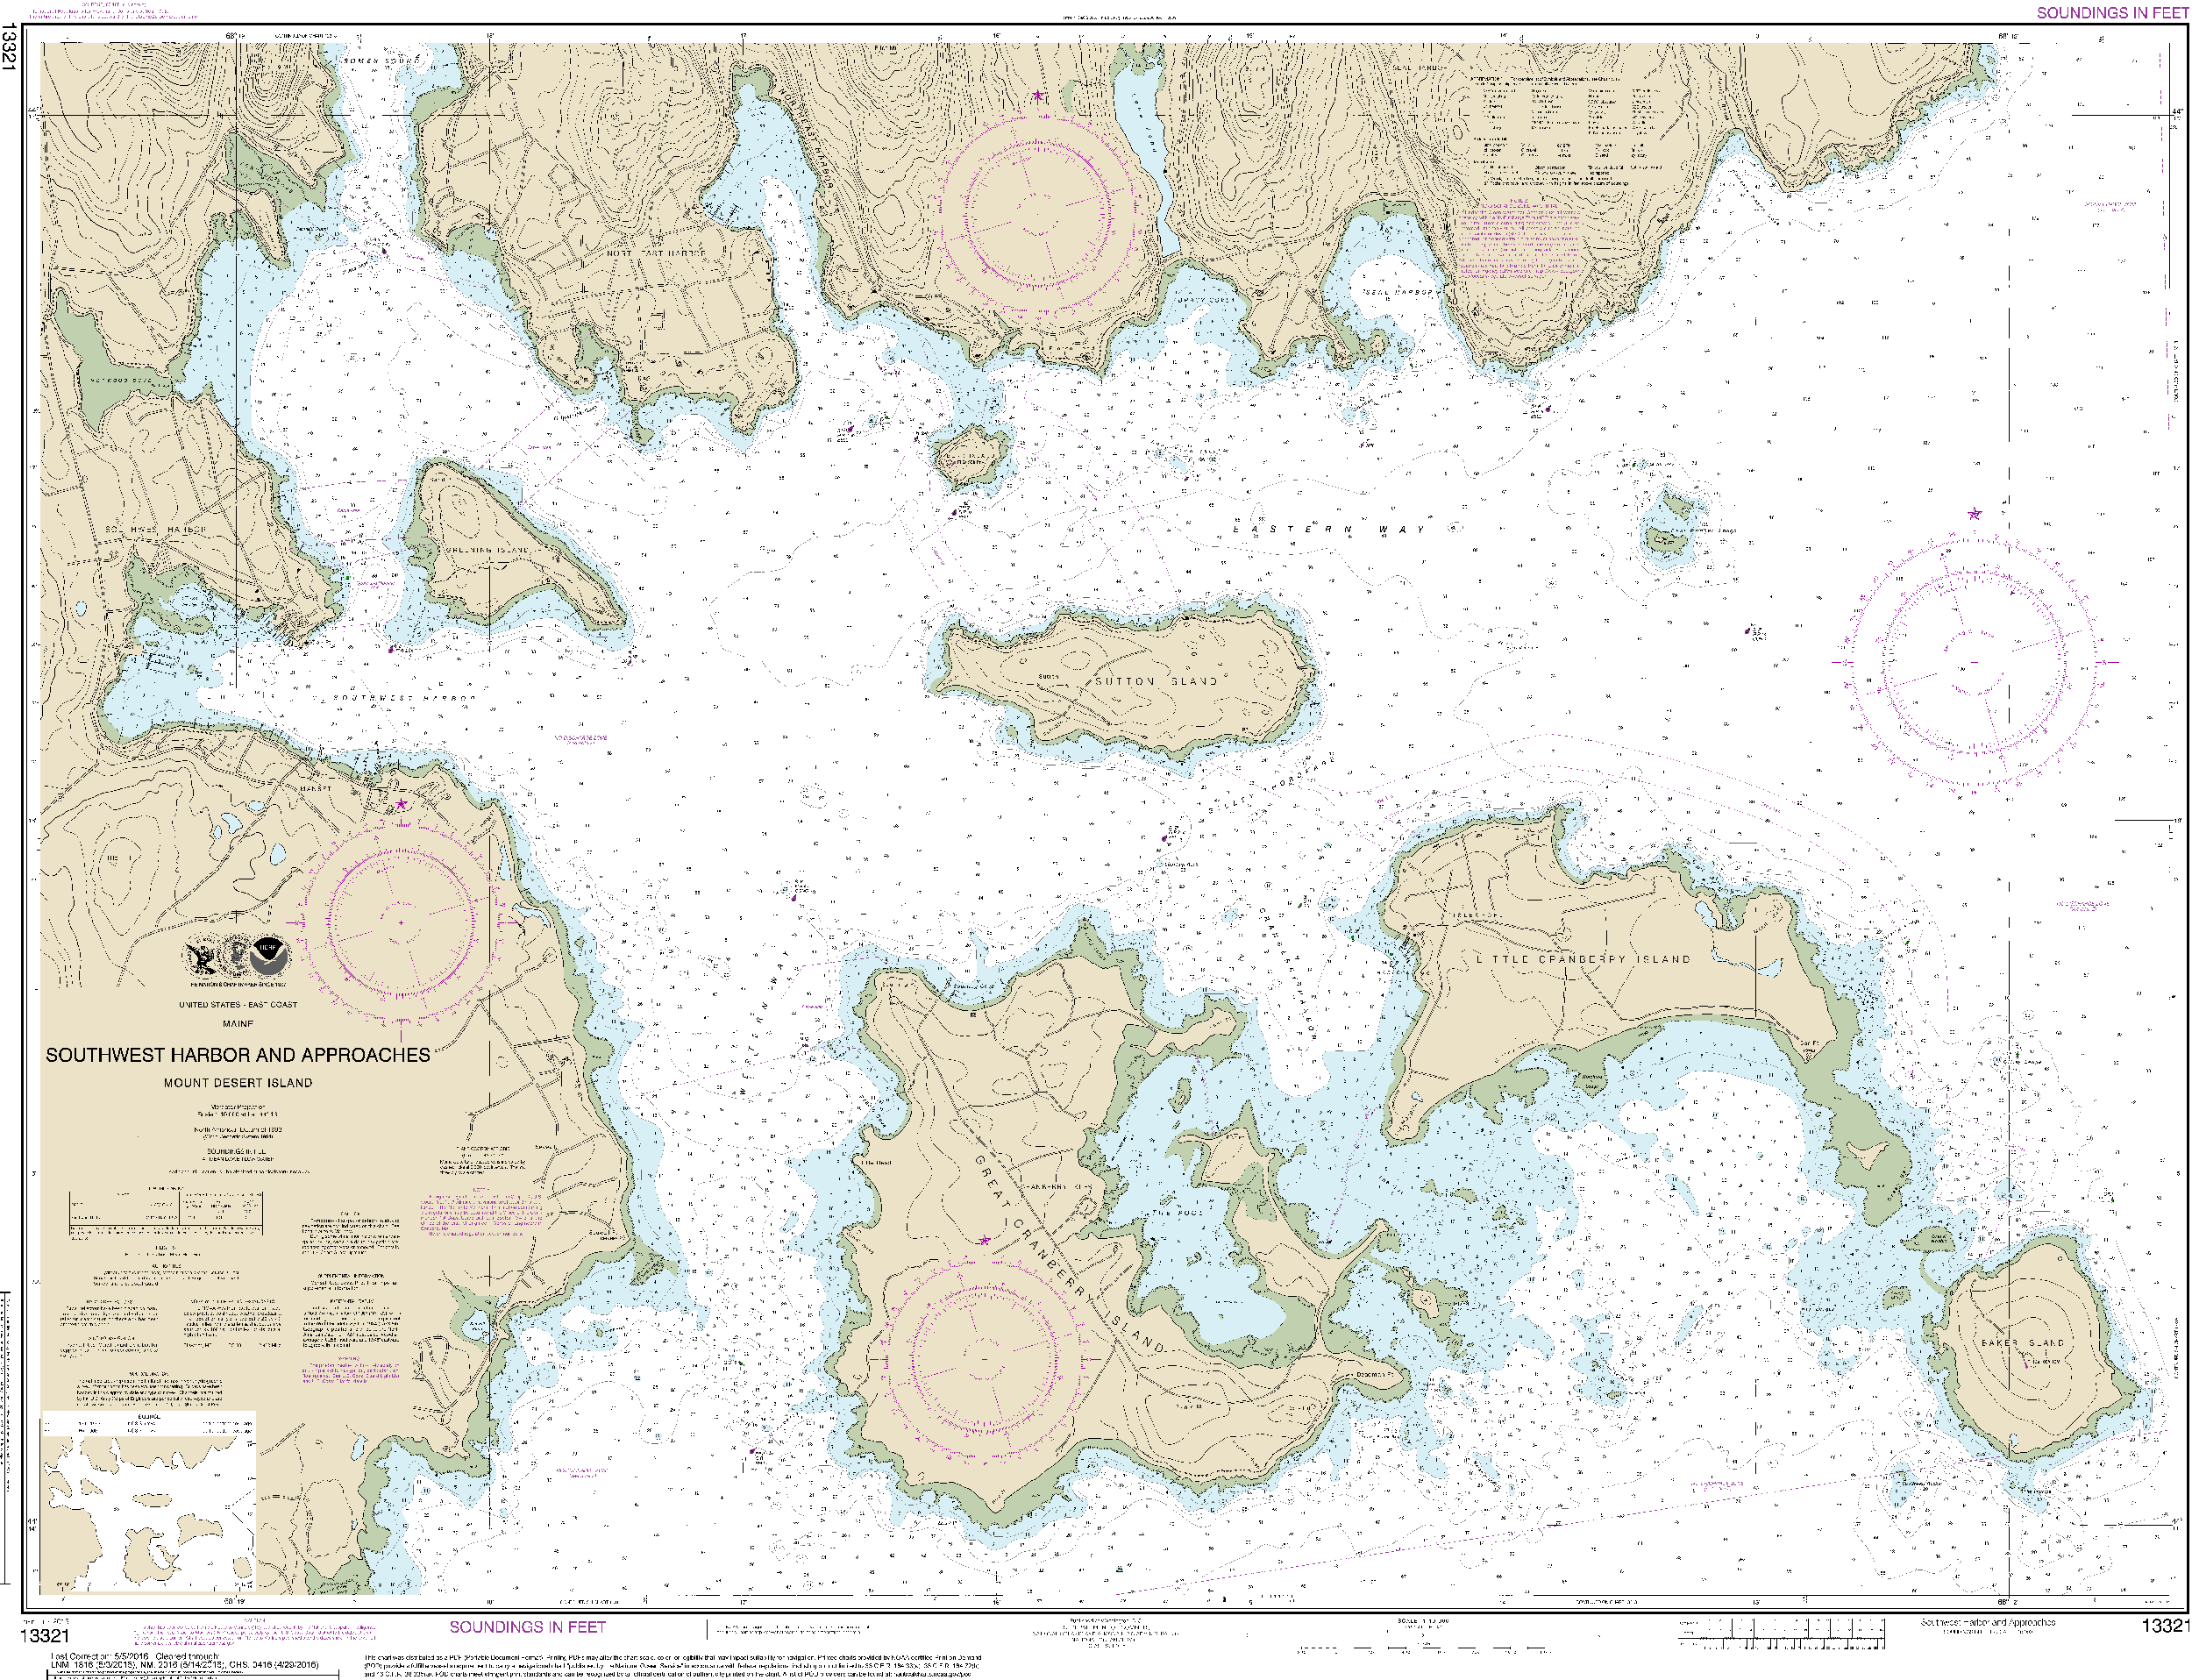 NOAA Nautical Chart 13321: Southwest Harbor and Approaches